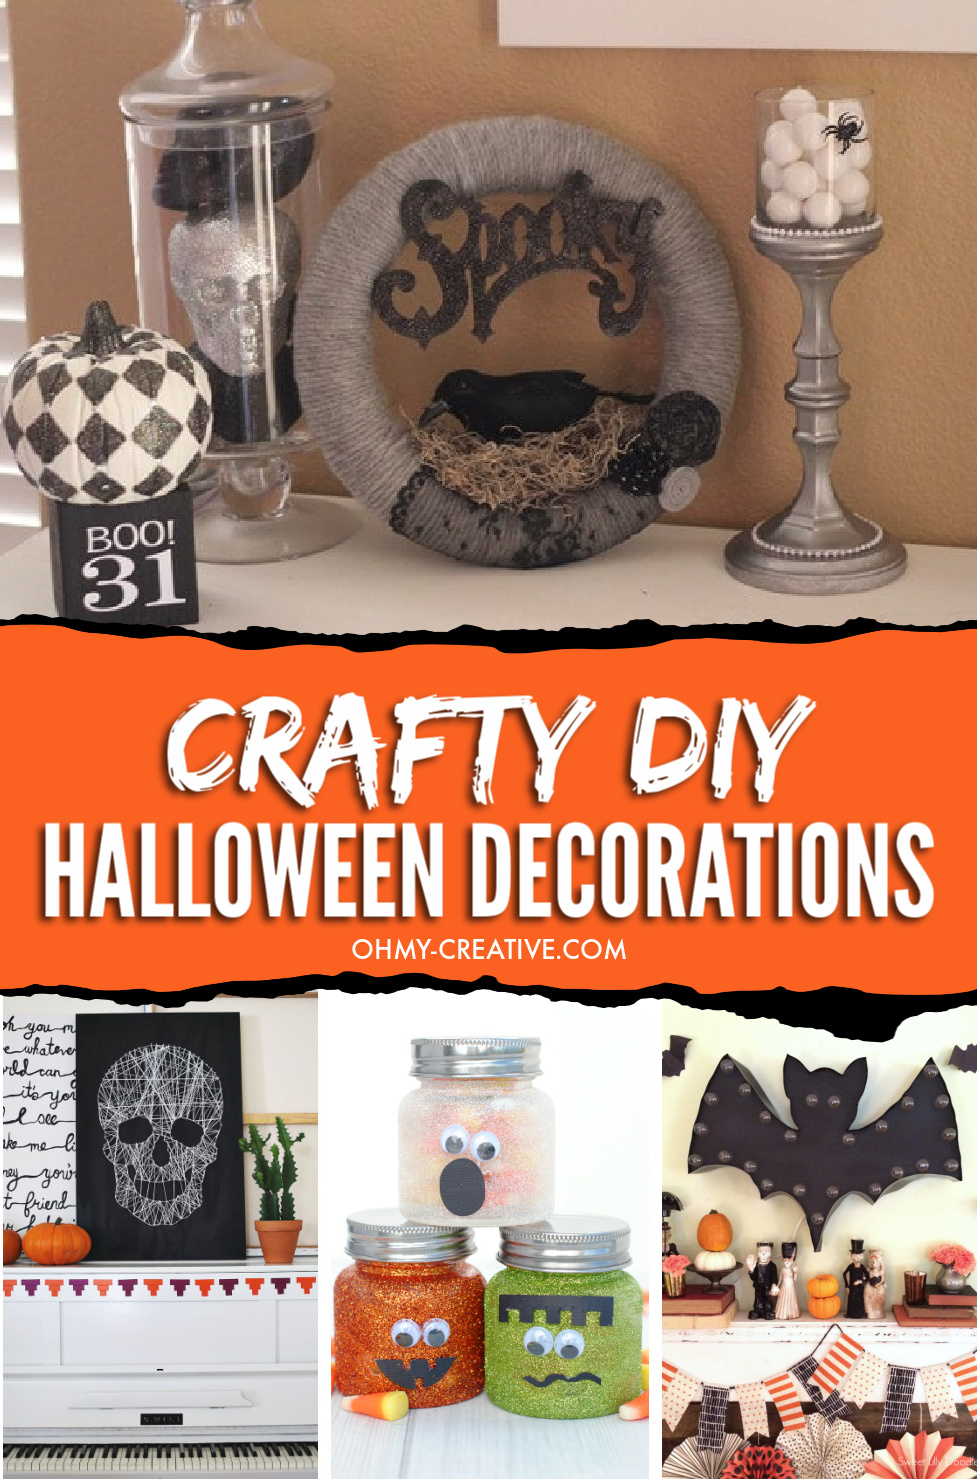 Crafty Do It Yourself Halloween Decorations